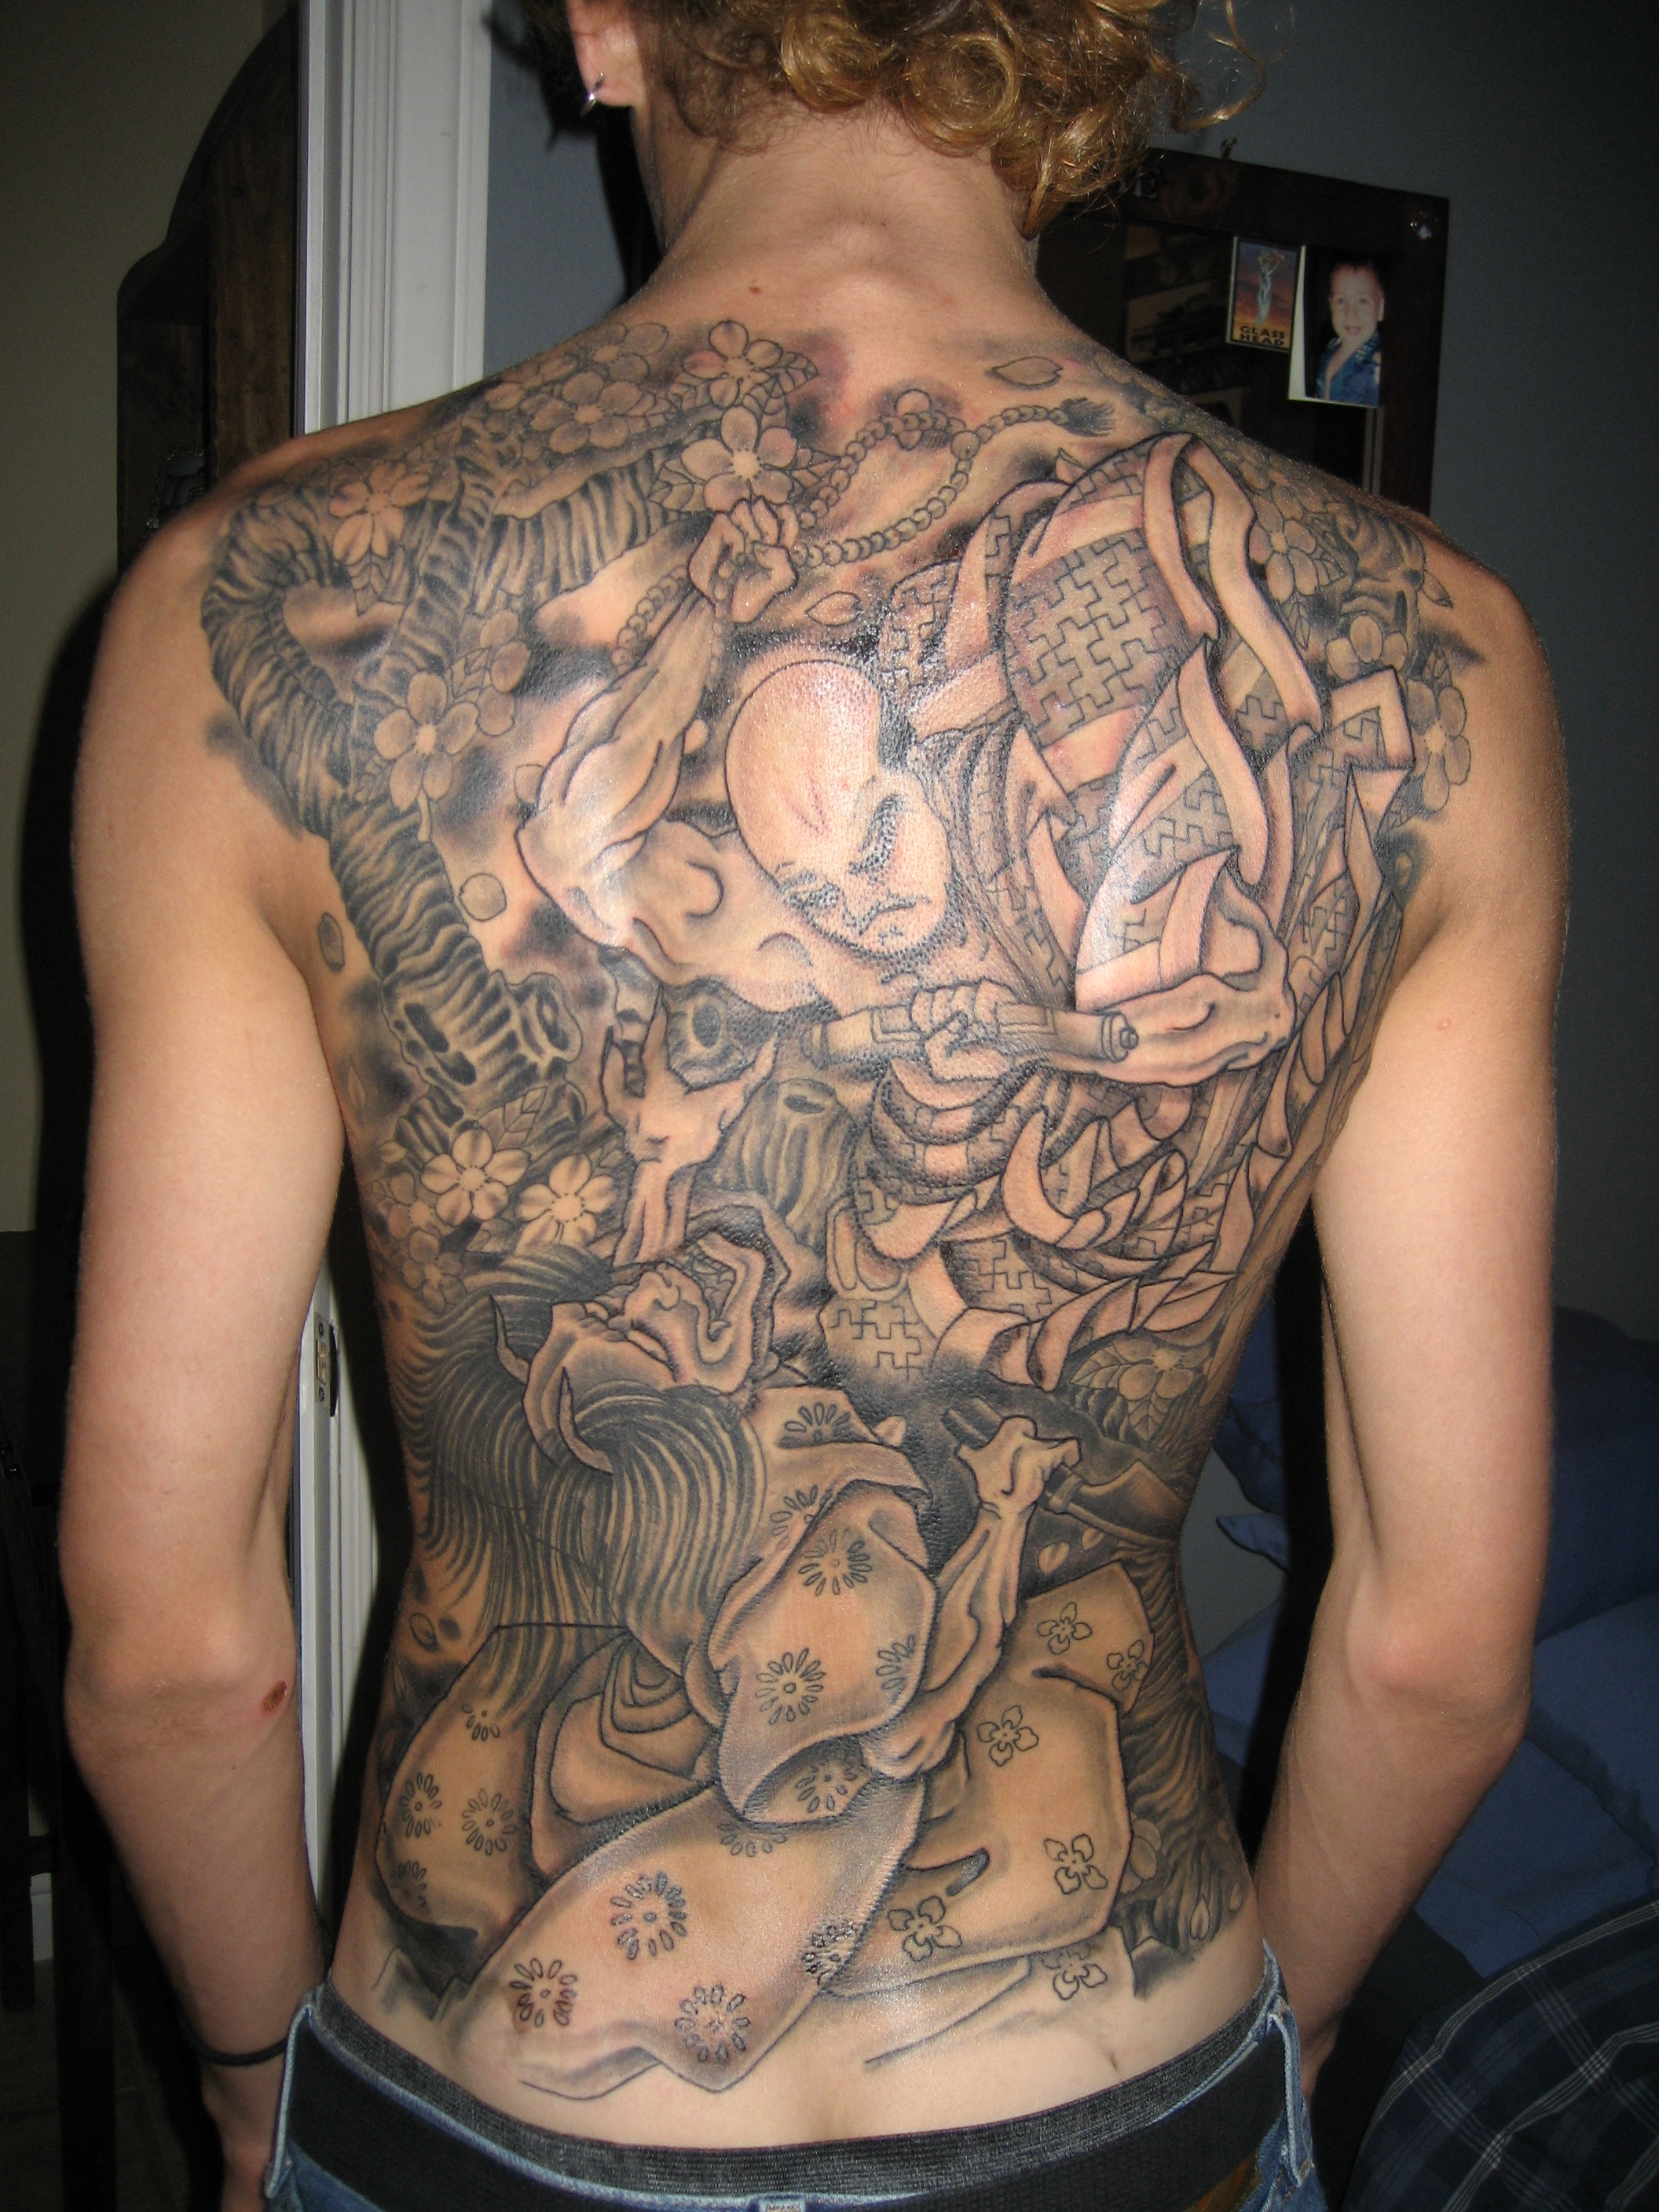 Displaying 18&gt; Images For - Gang Members Tattoos